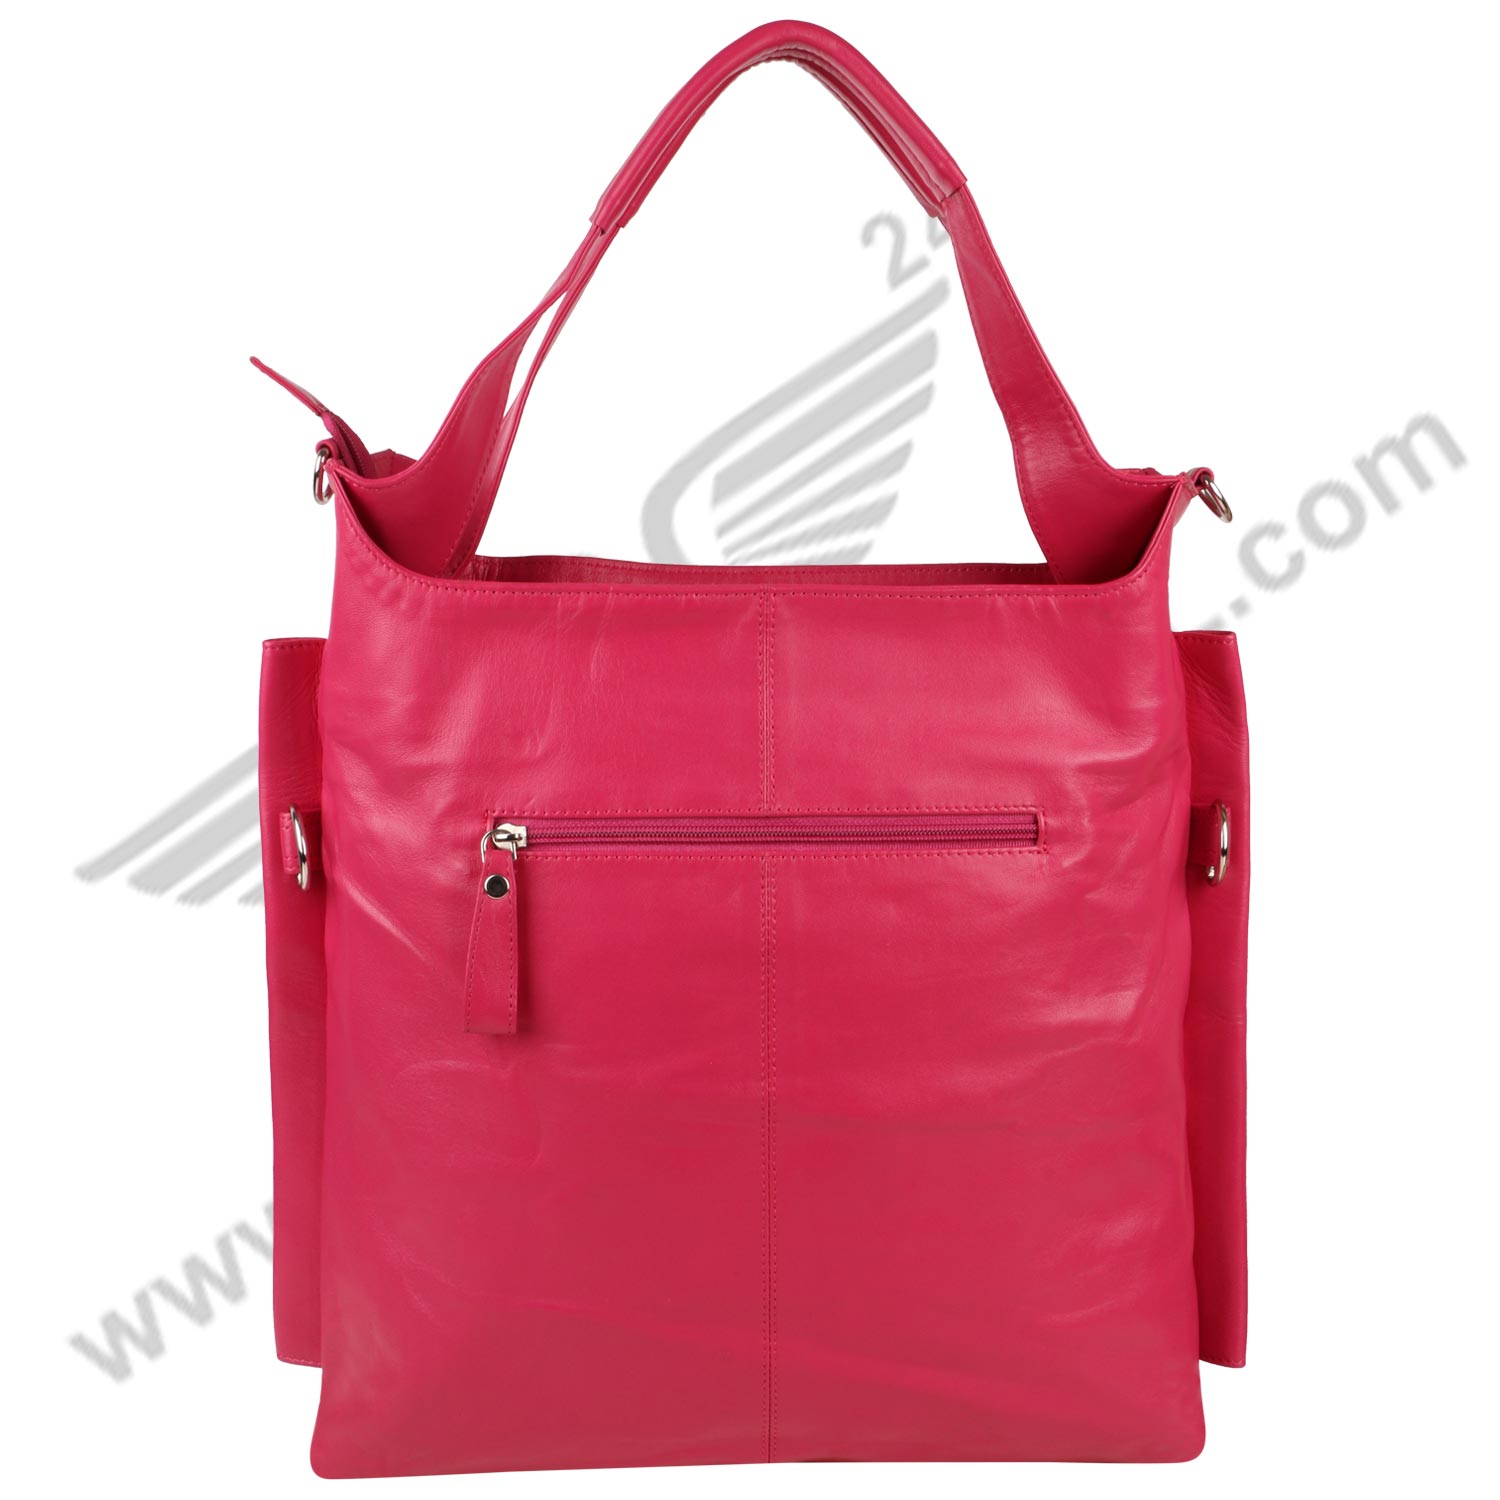 Pink FER GAMO HAND BAG with straps.